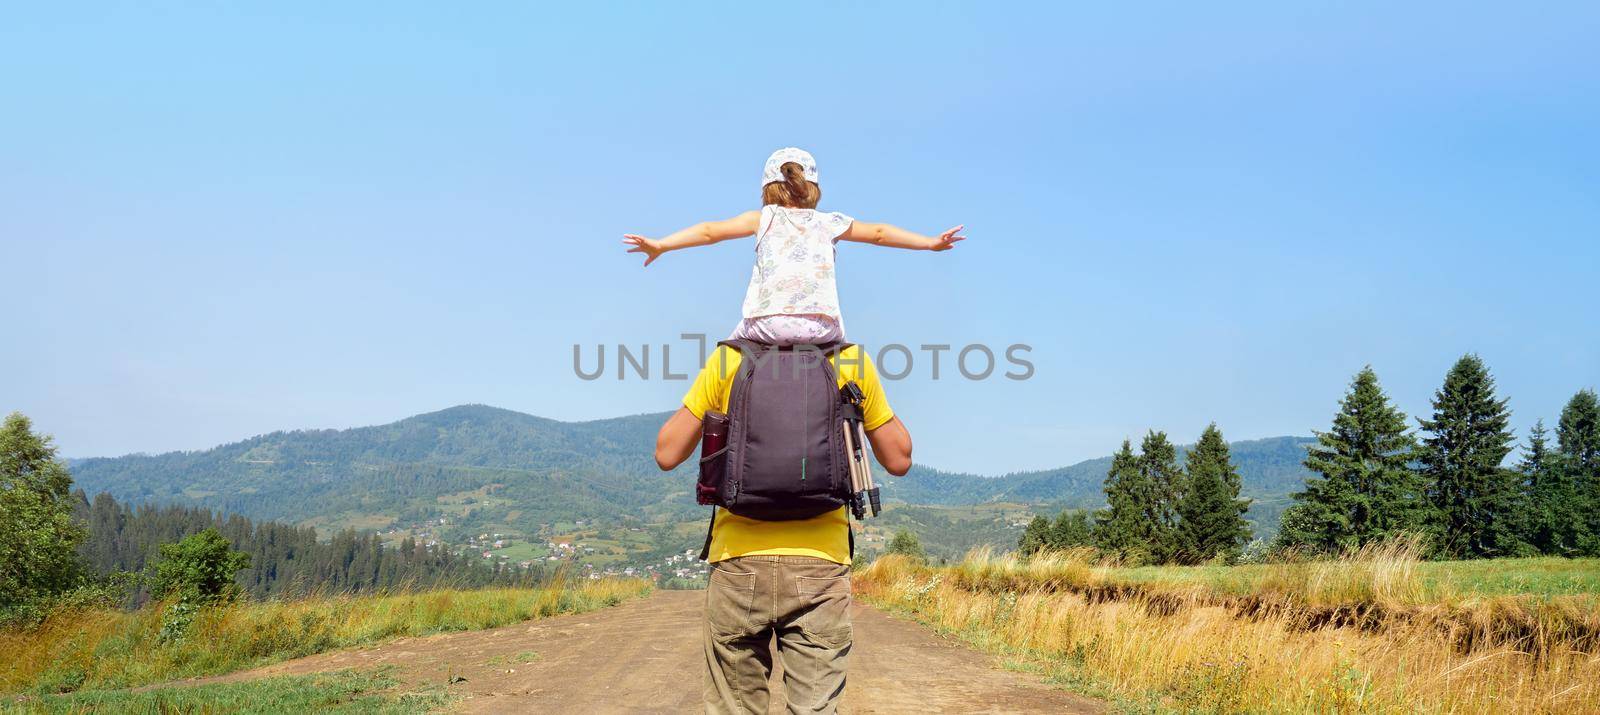 Piggyback ride father child travel mountain kids freedom child on shoulders dad and daughter father walking hiking trip nature kid arms spread out. Freedom mountain children hiking trail walking hills by synel